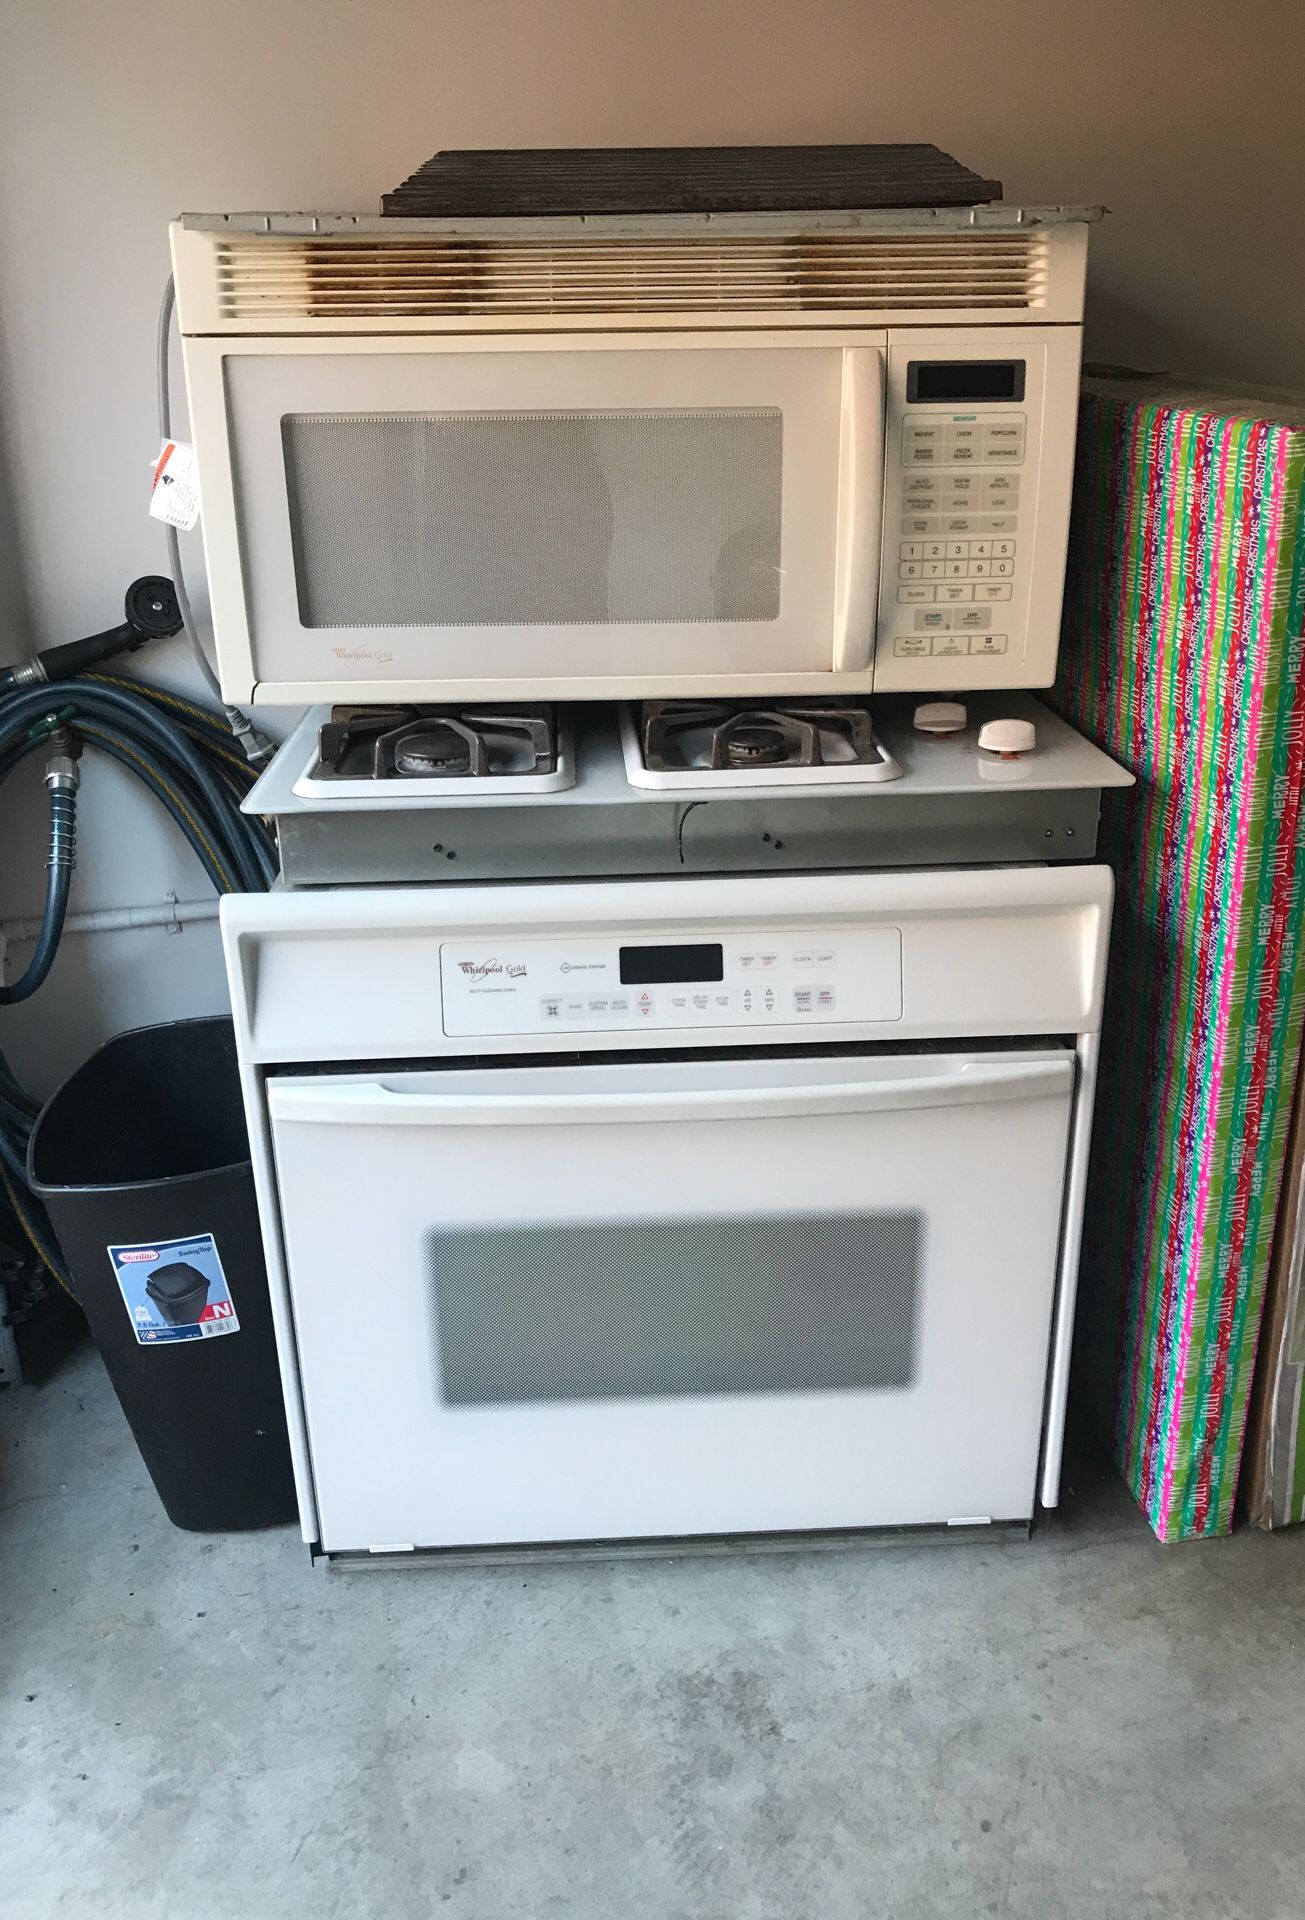 Whirlpool appliances in white